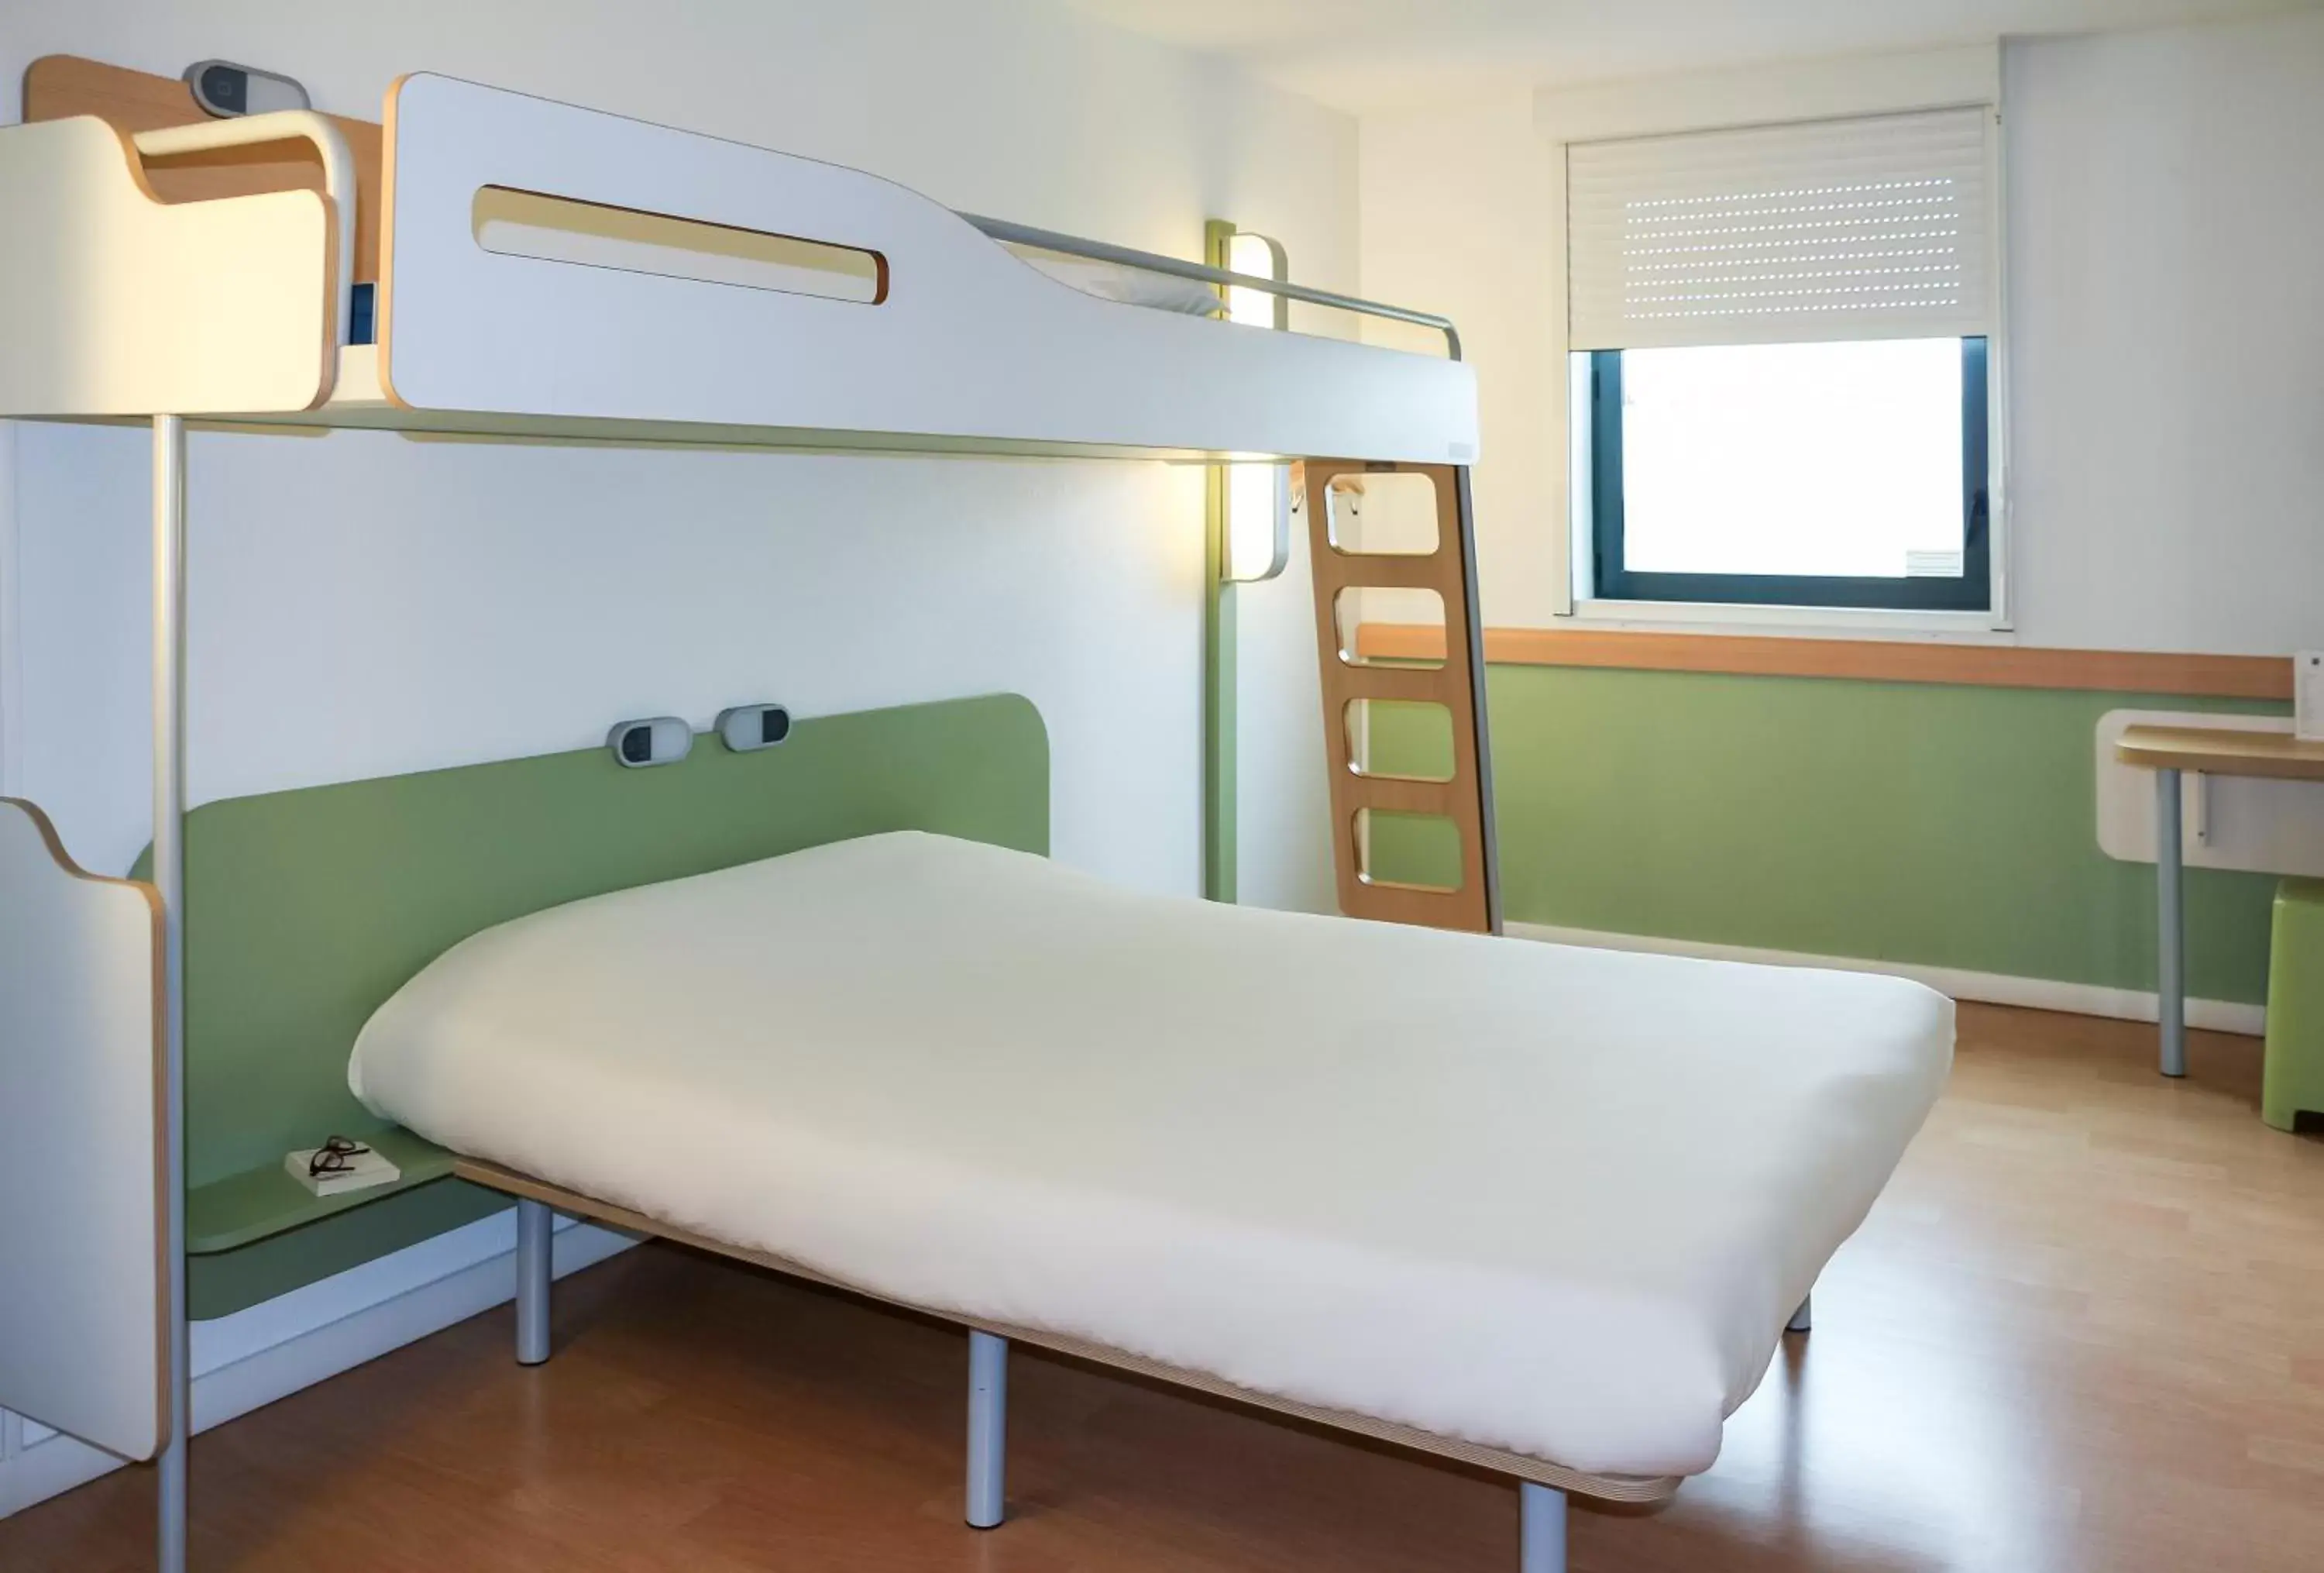 Day, Room Photo in ibis budget Castelnaudary - A61